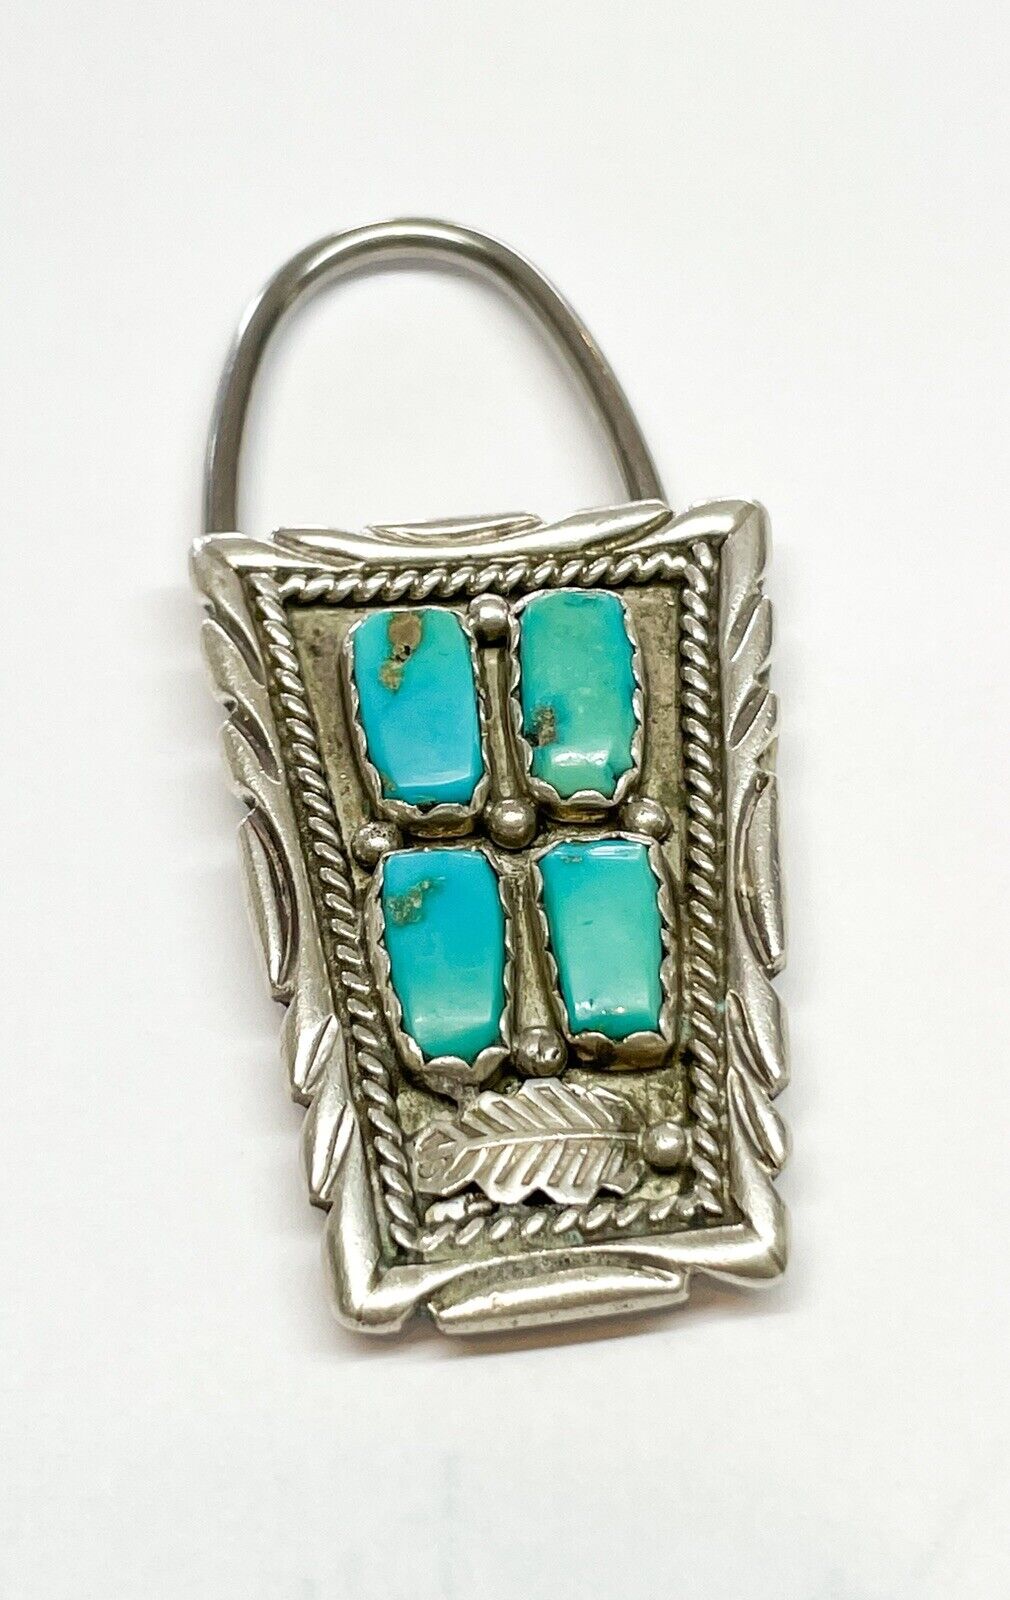 Vintage Zuni Artist Angie C. Cheama Sterling Silver Turquoise Keychain